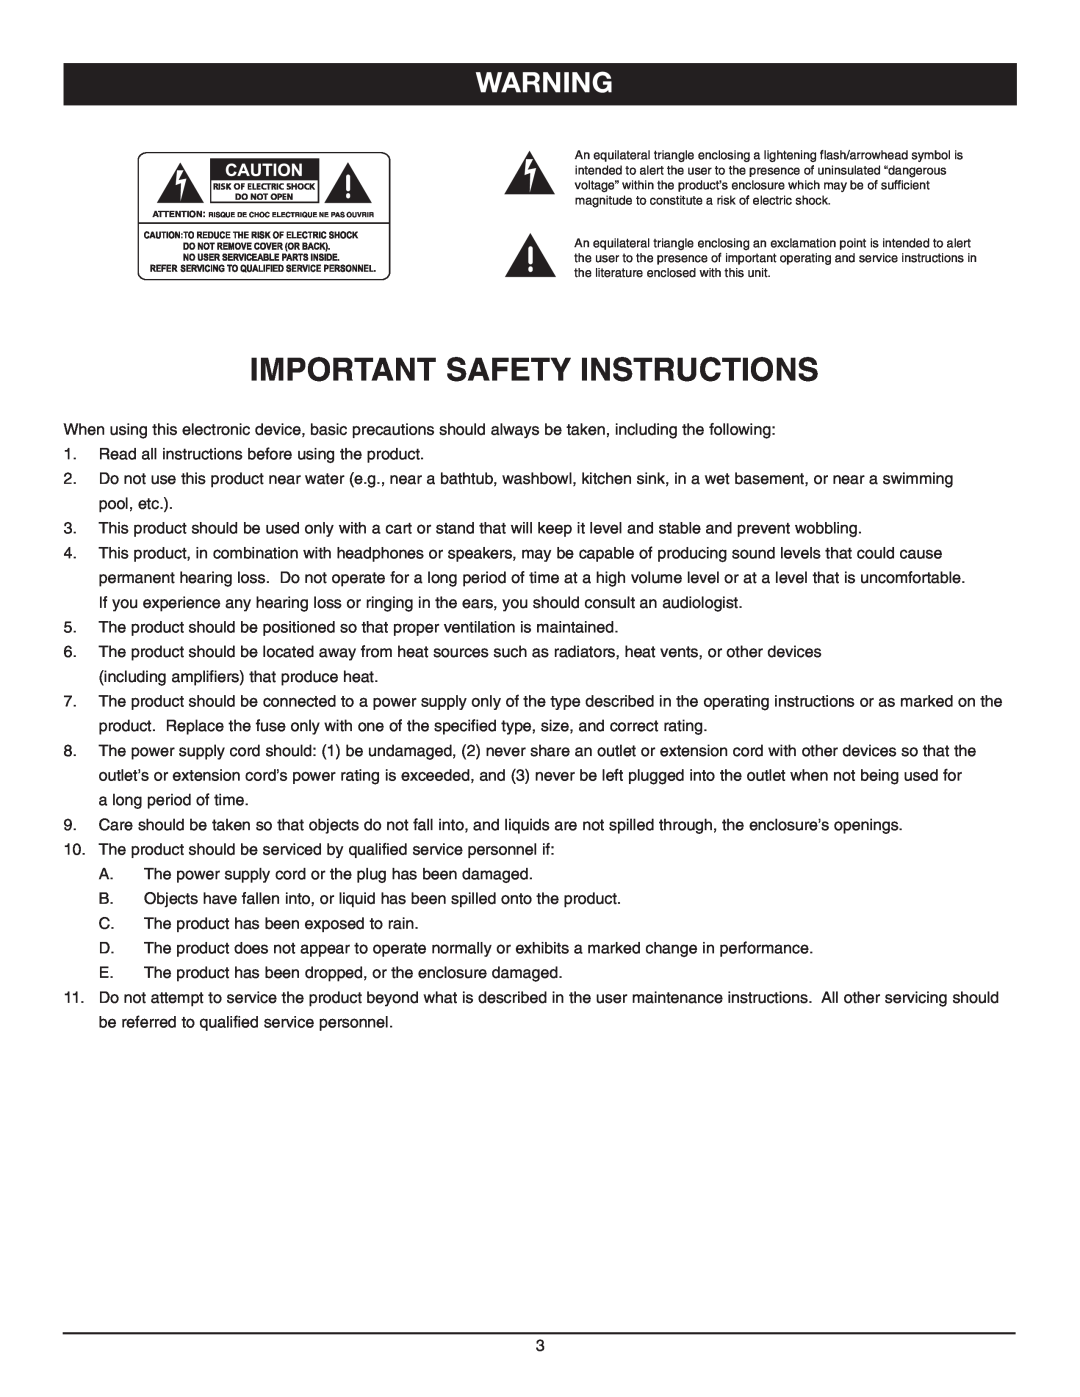 Nady Systems 4180 owner manual Important Safety Instructions 